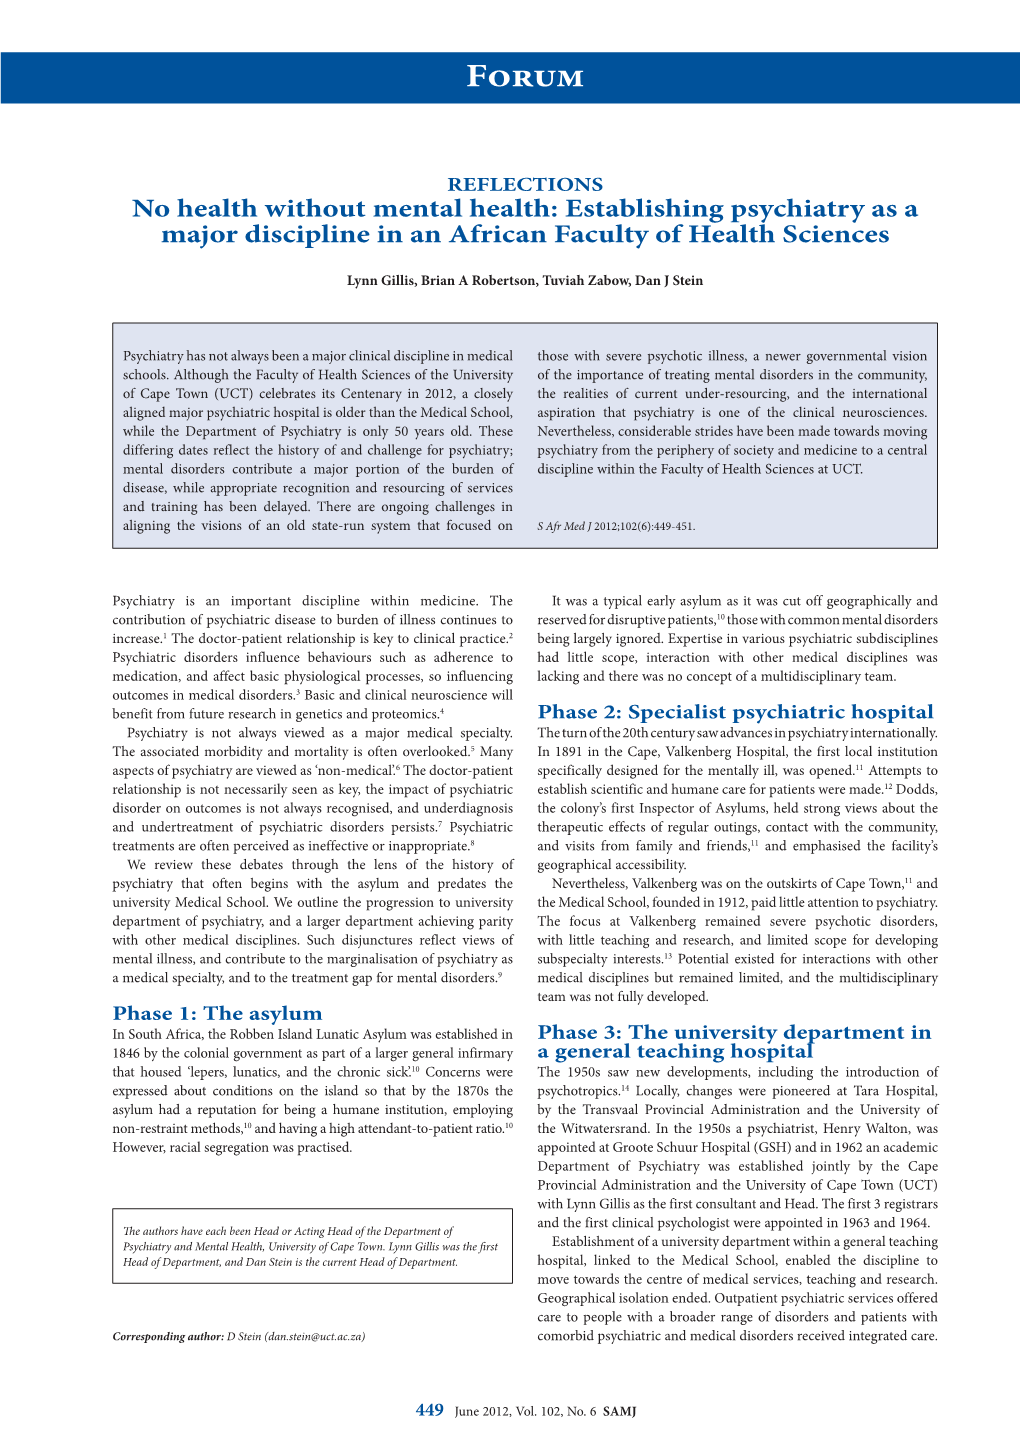 No Health Without Mental Health: Establishing Psychiatry As a Major Discipline in an African Faculty of Health Sciences